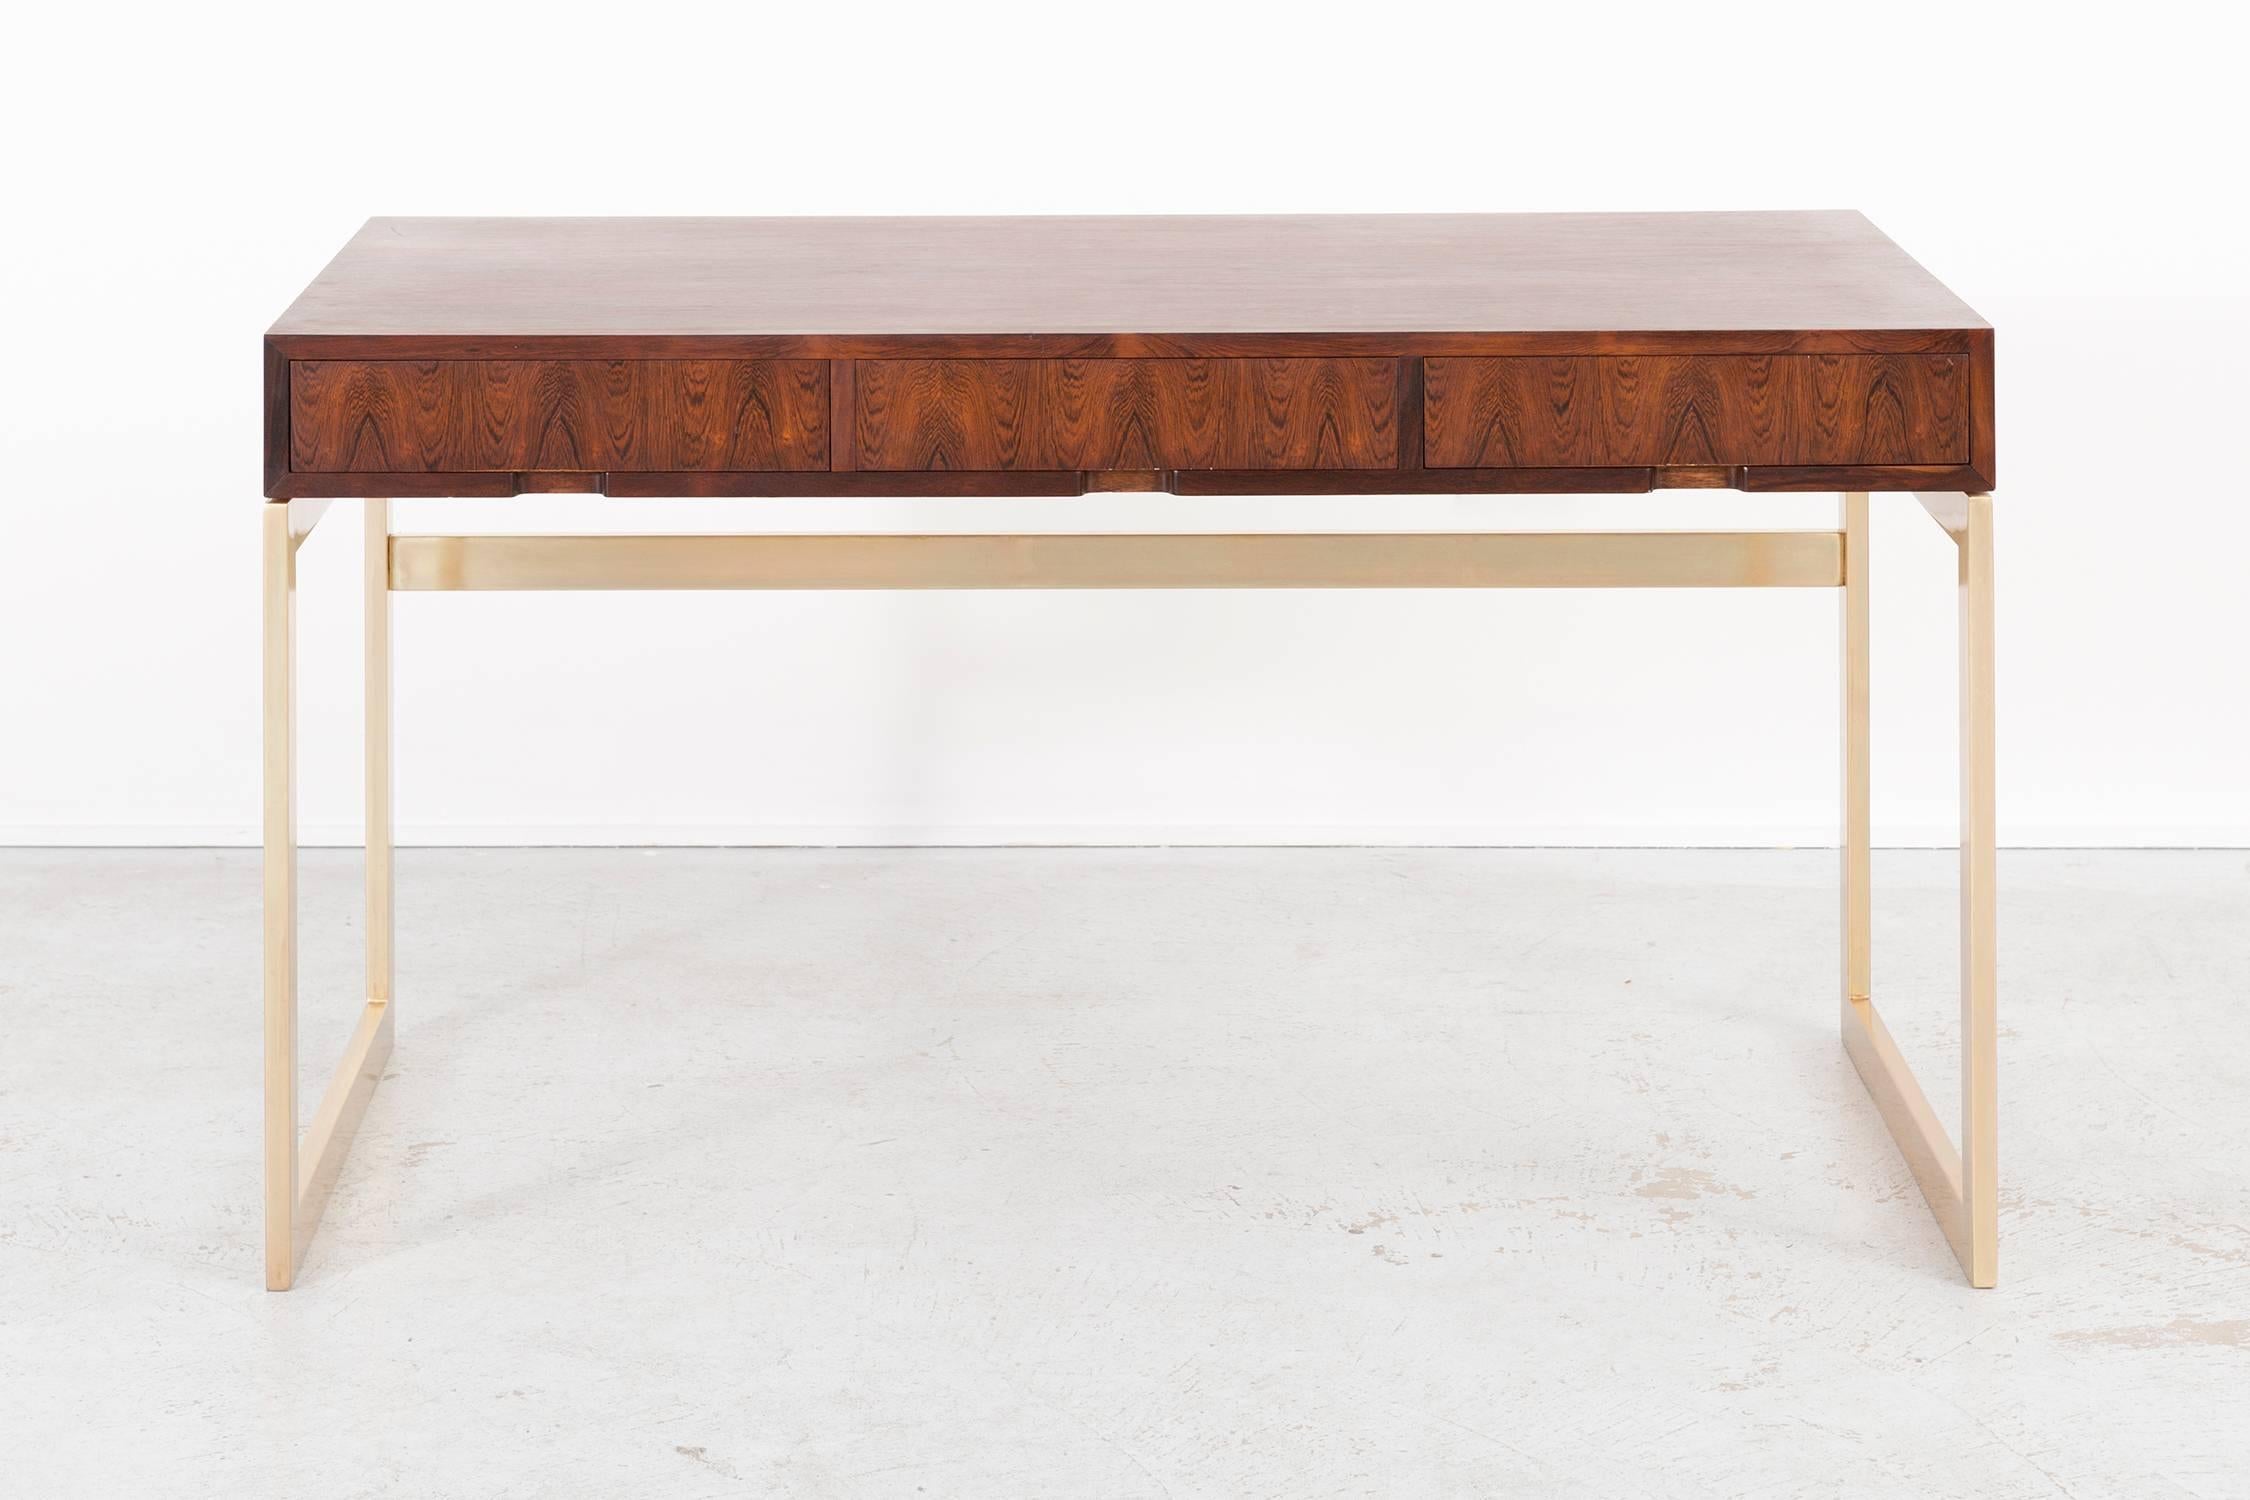 Desk

Designed by Milo Baughman

USA, circa 1970s

Rosewood and brass

Measure: 29 ?” H x 52” W x 26 ¼” D.

 